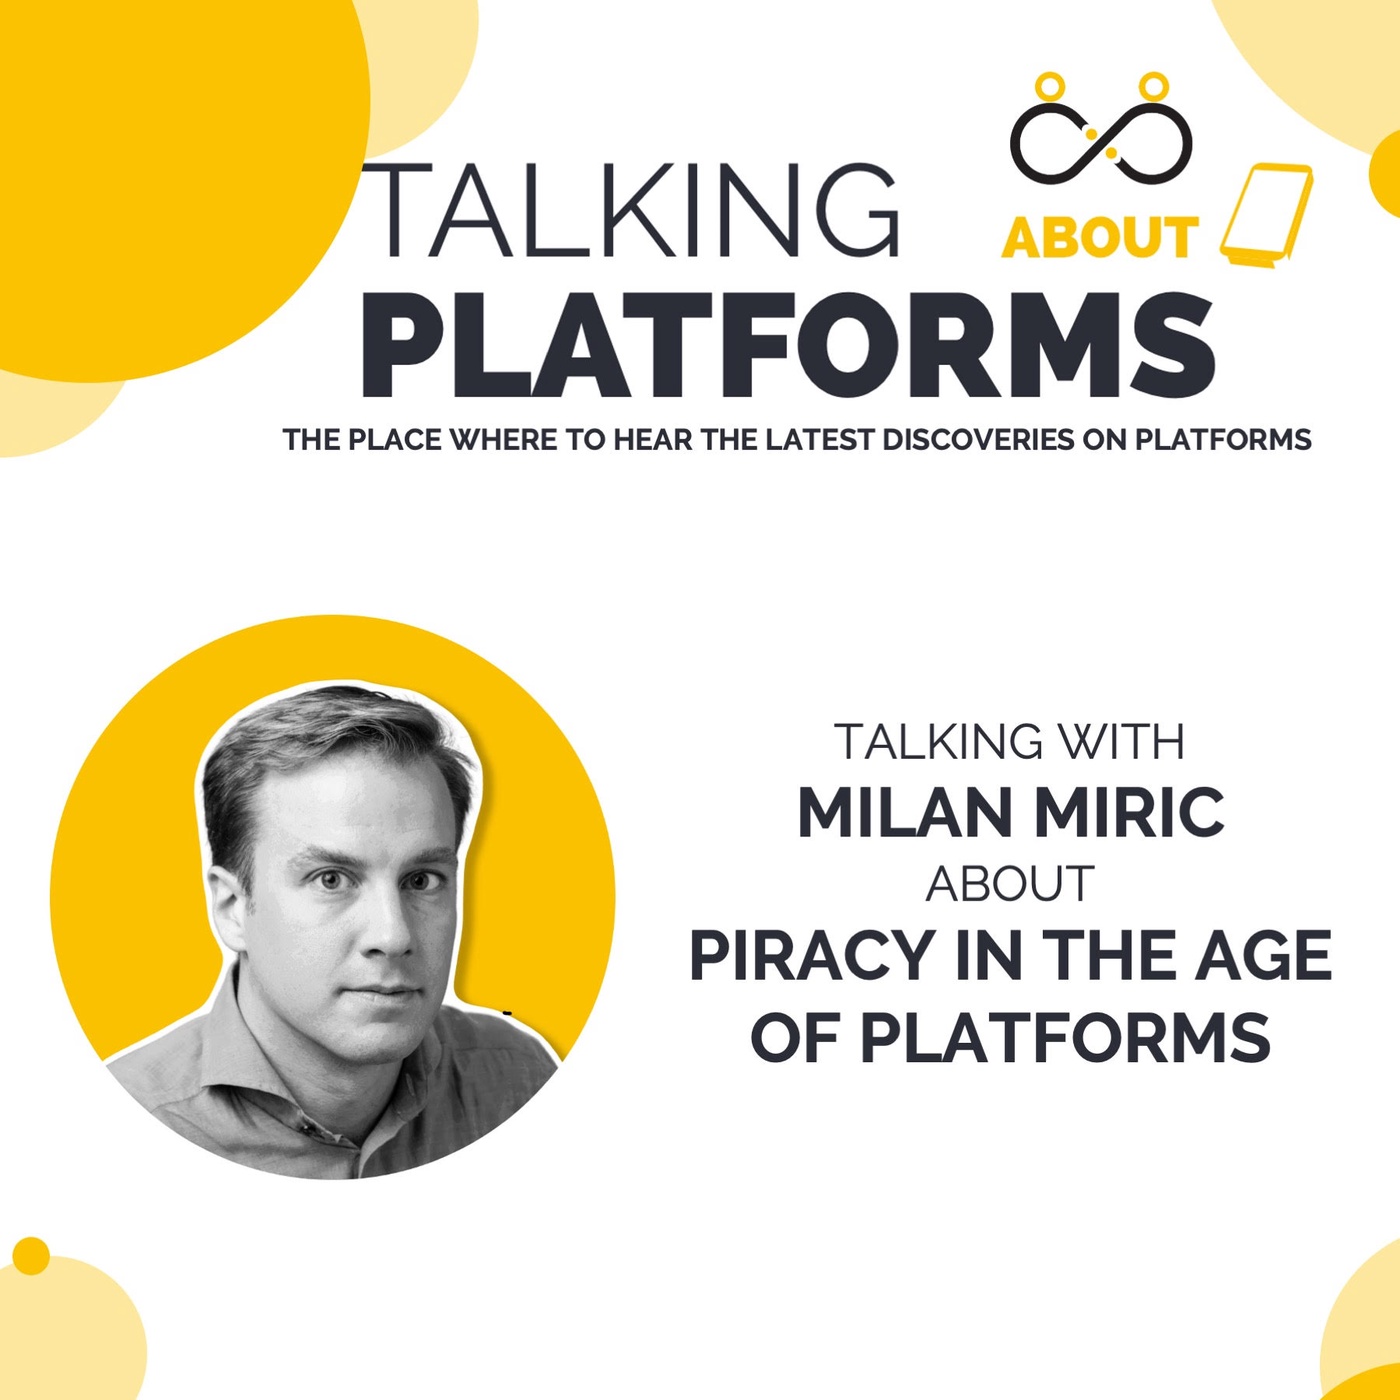 Piracy in the age of platforms with Milan Miric